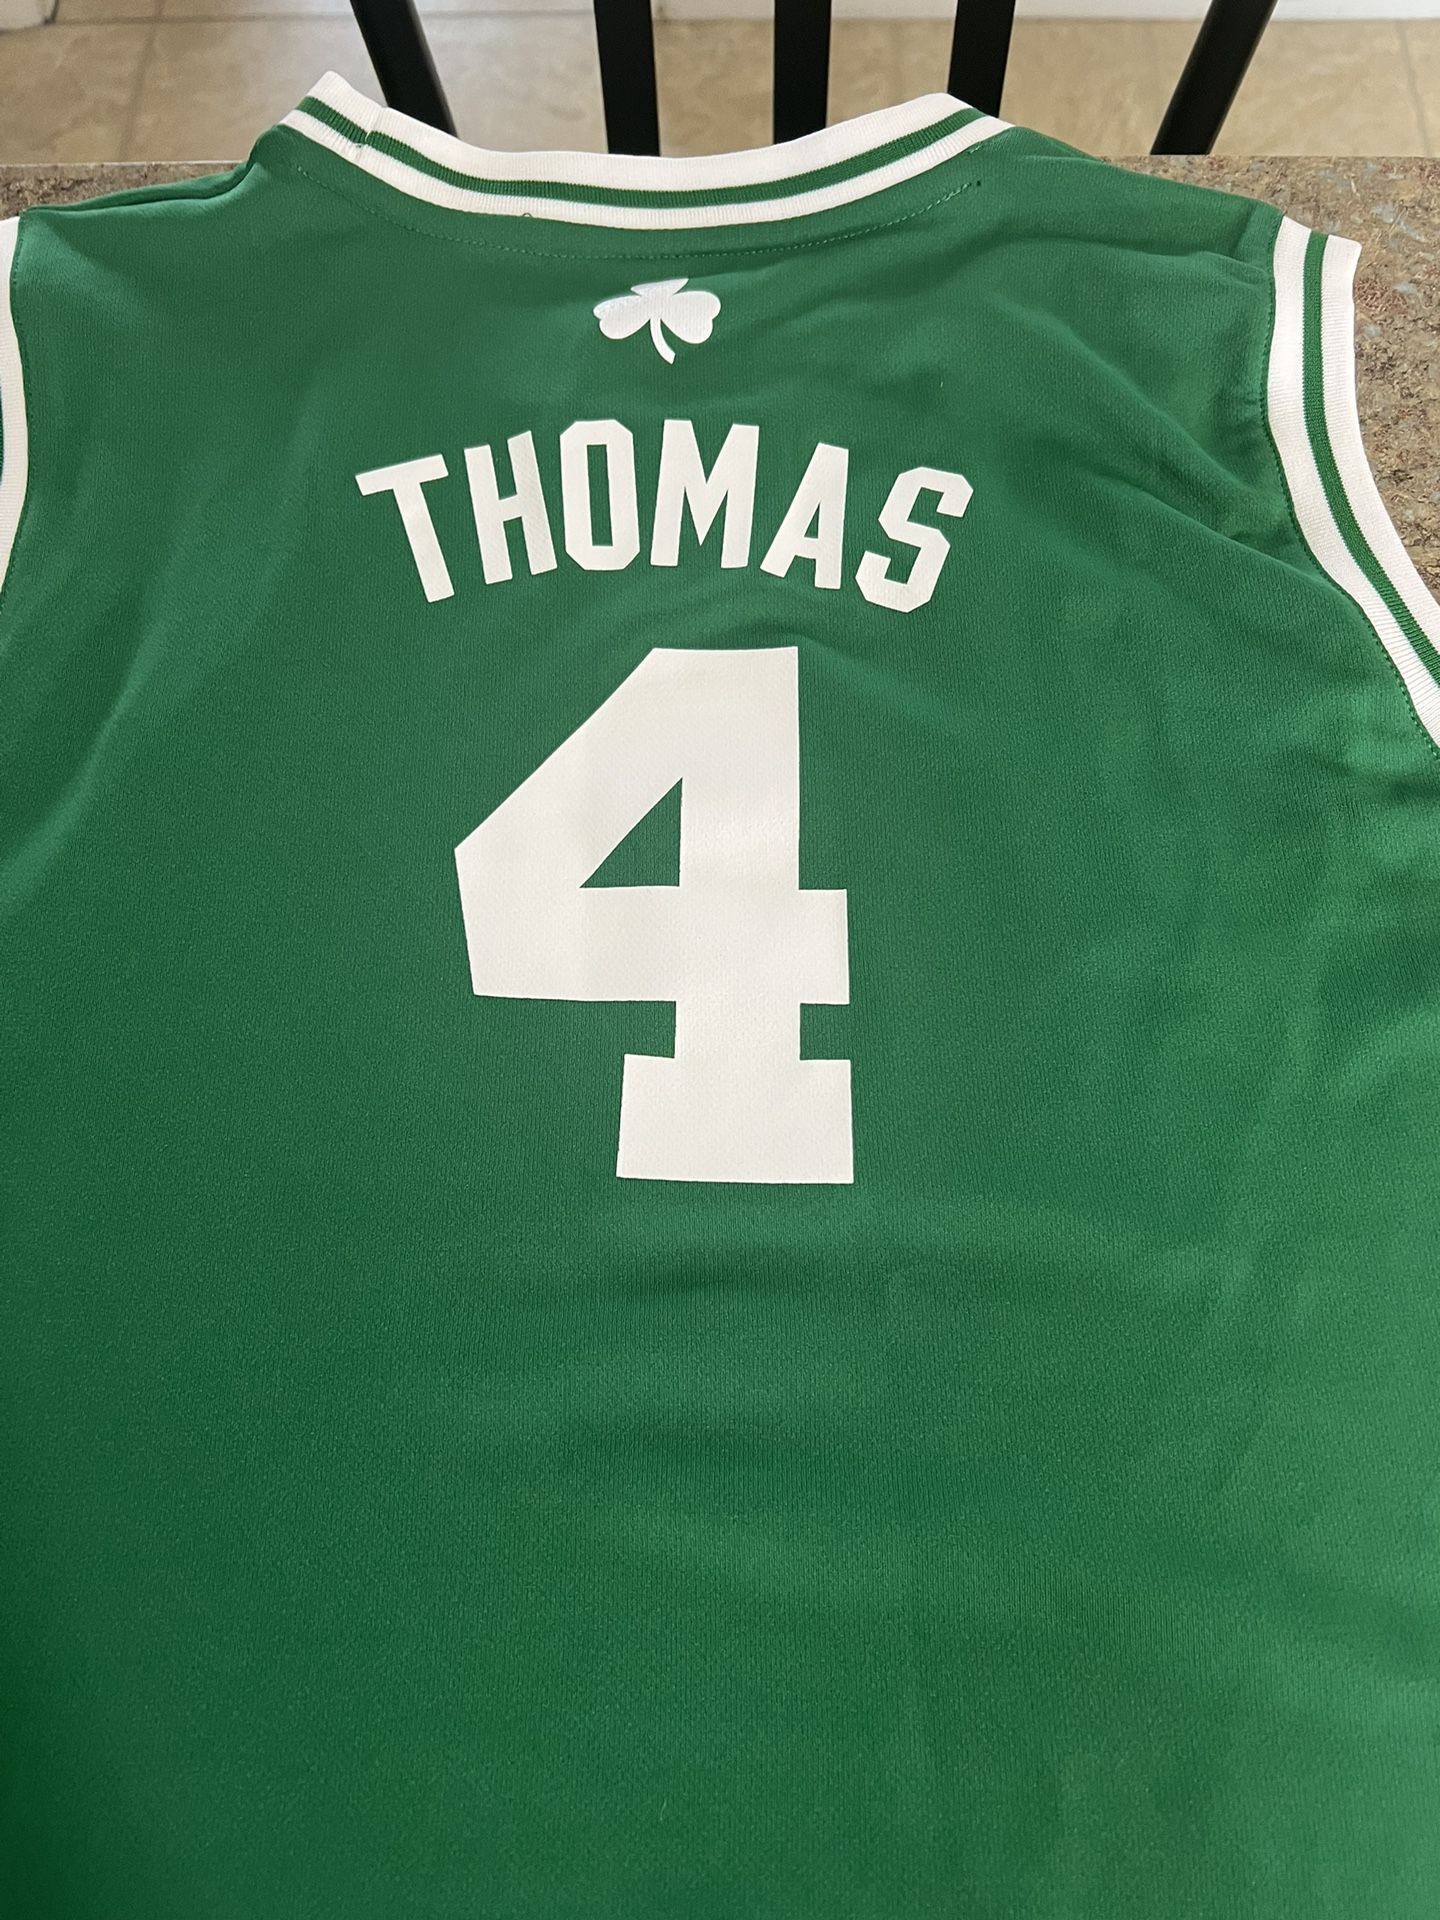 Isaiah Thomas Authentic Jersey 2x for Sale in Flat Rock, MI - OfferUp